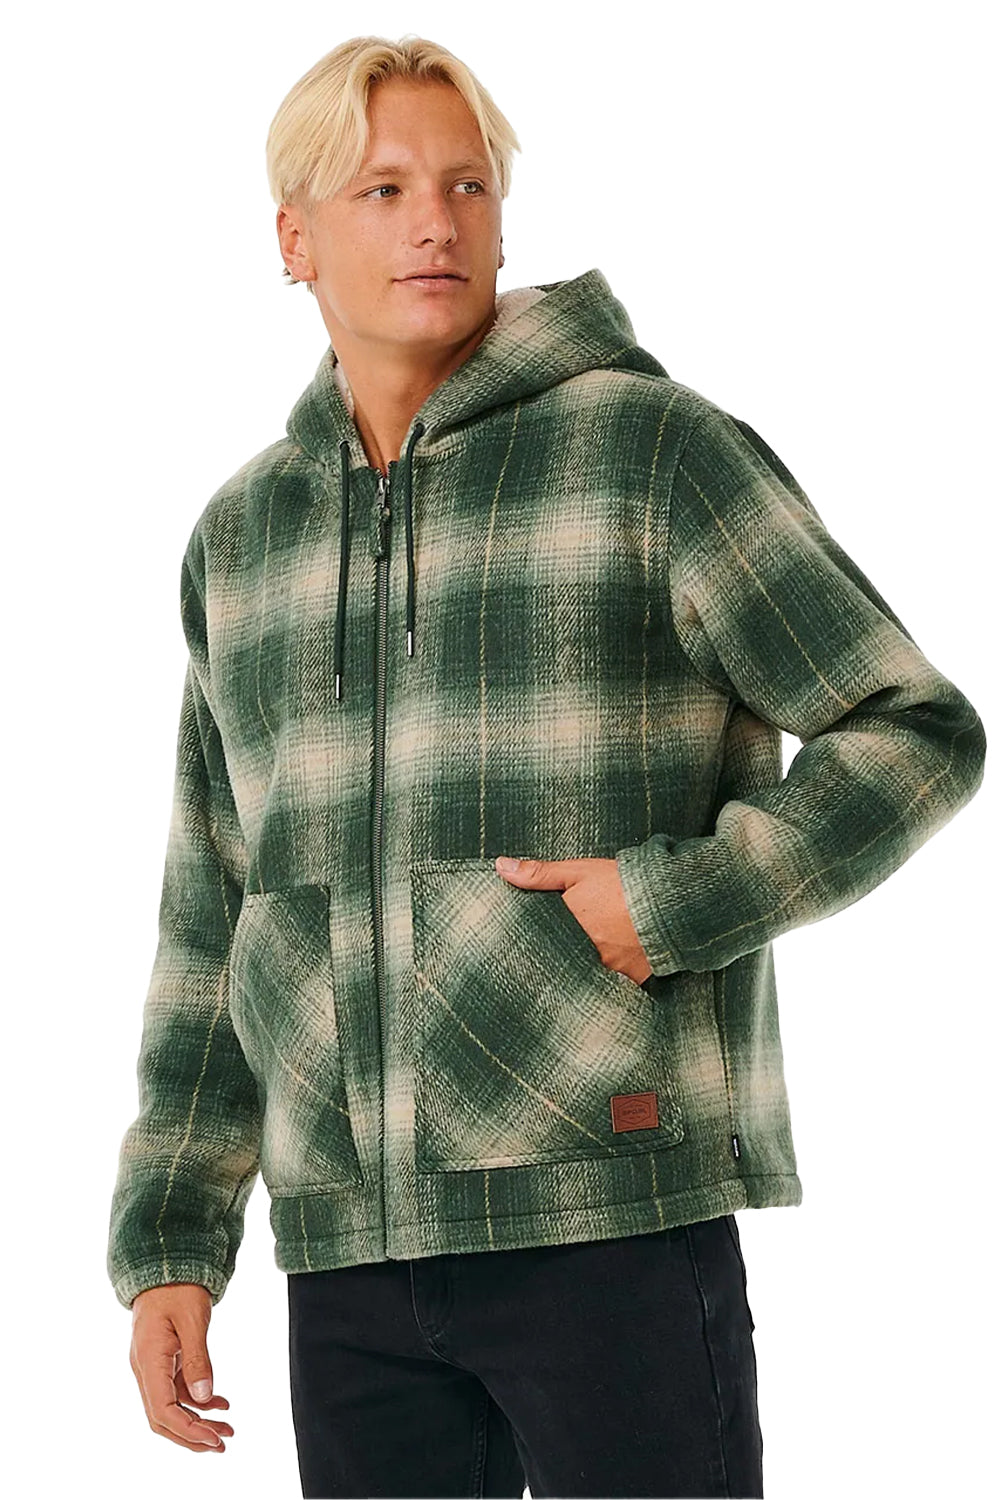 Rip Curl Classic Surf Check Jacket